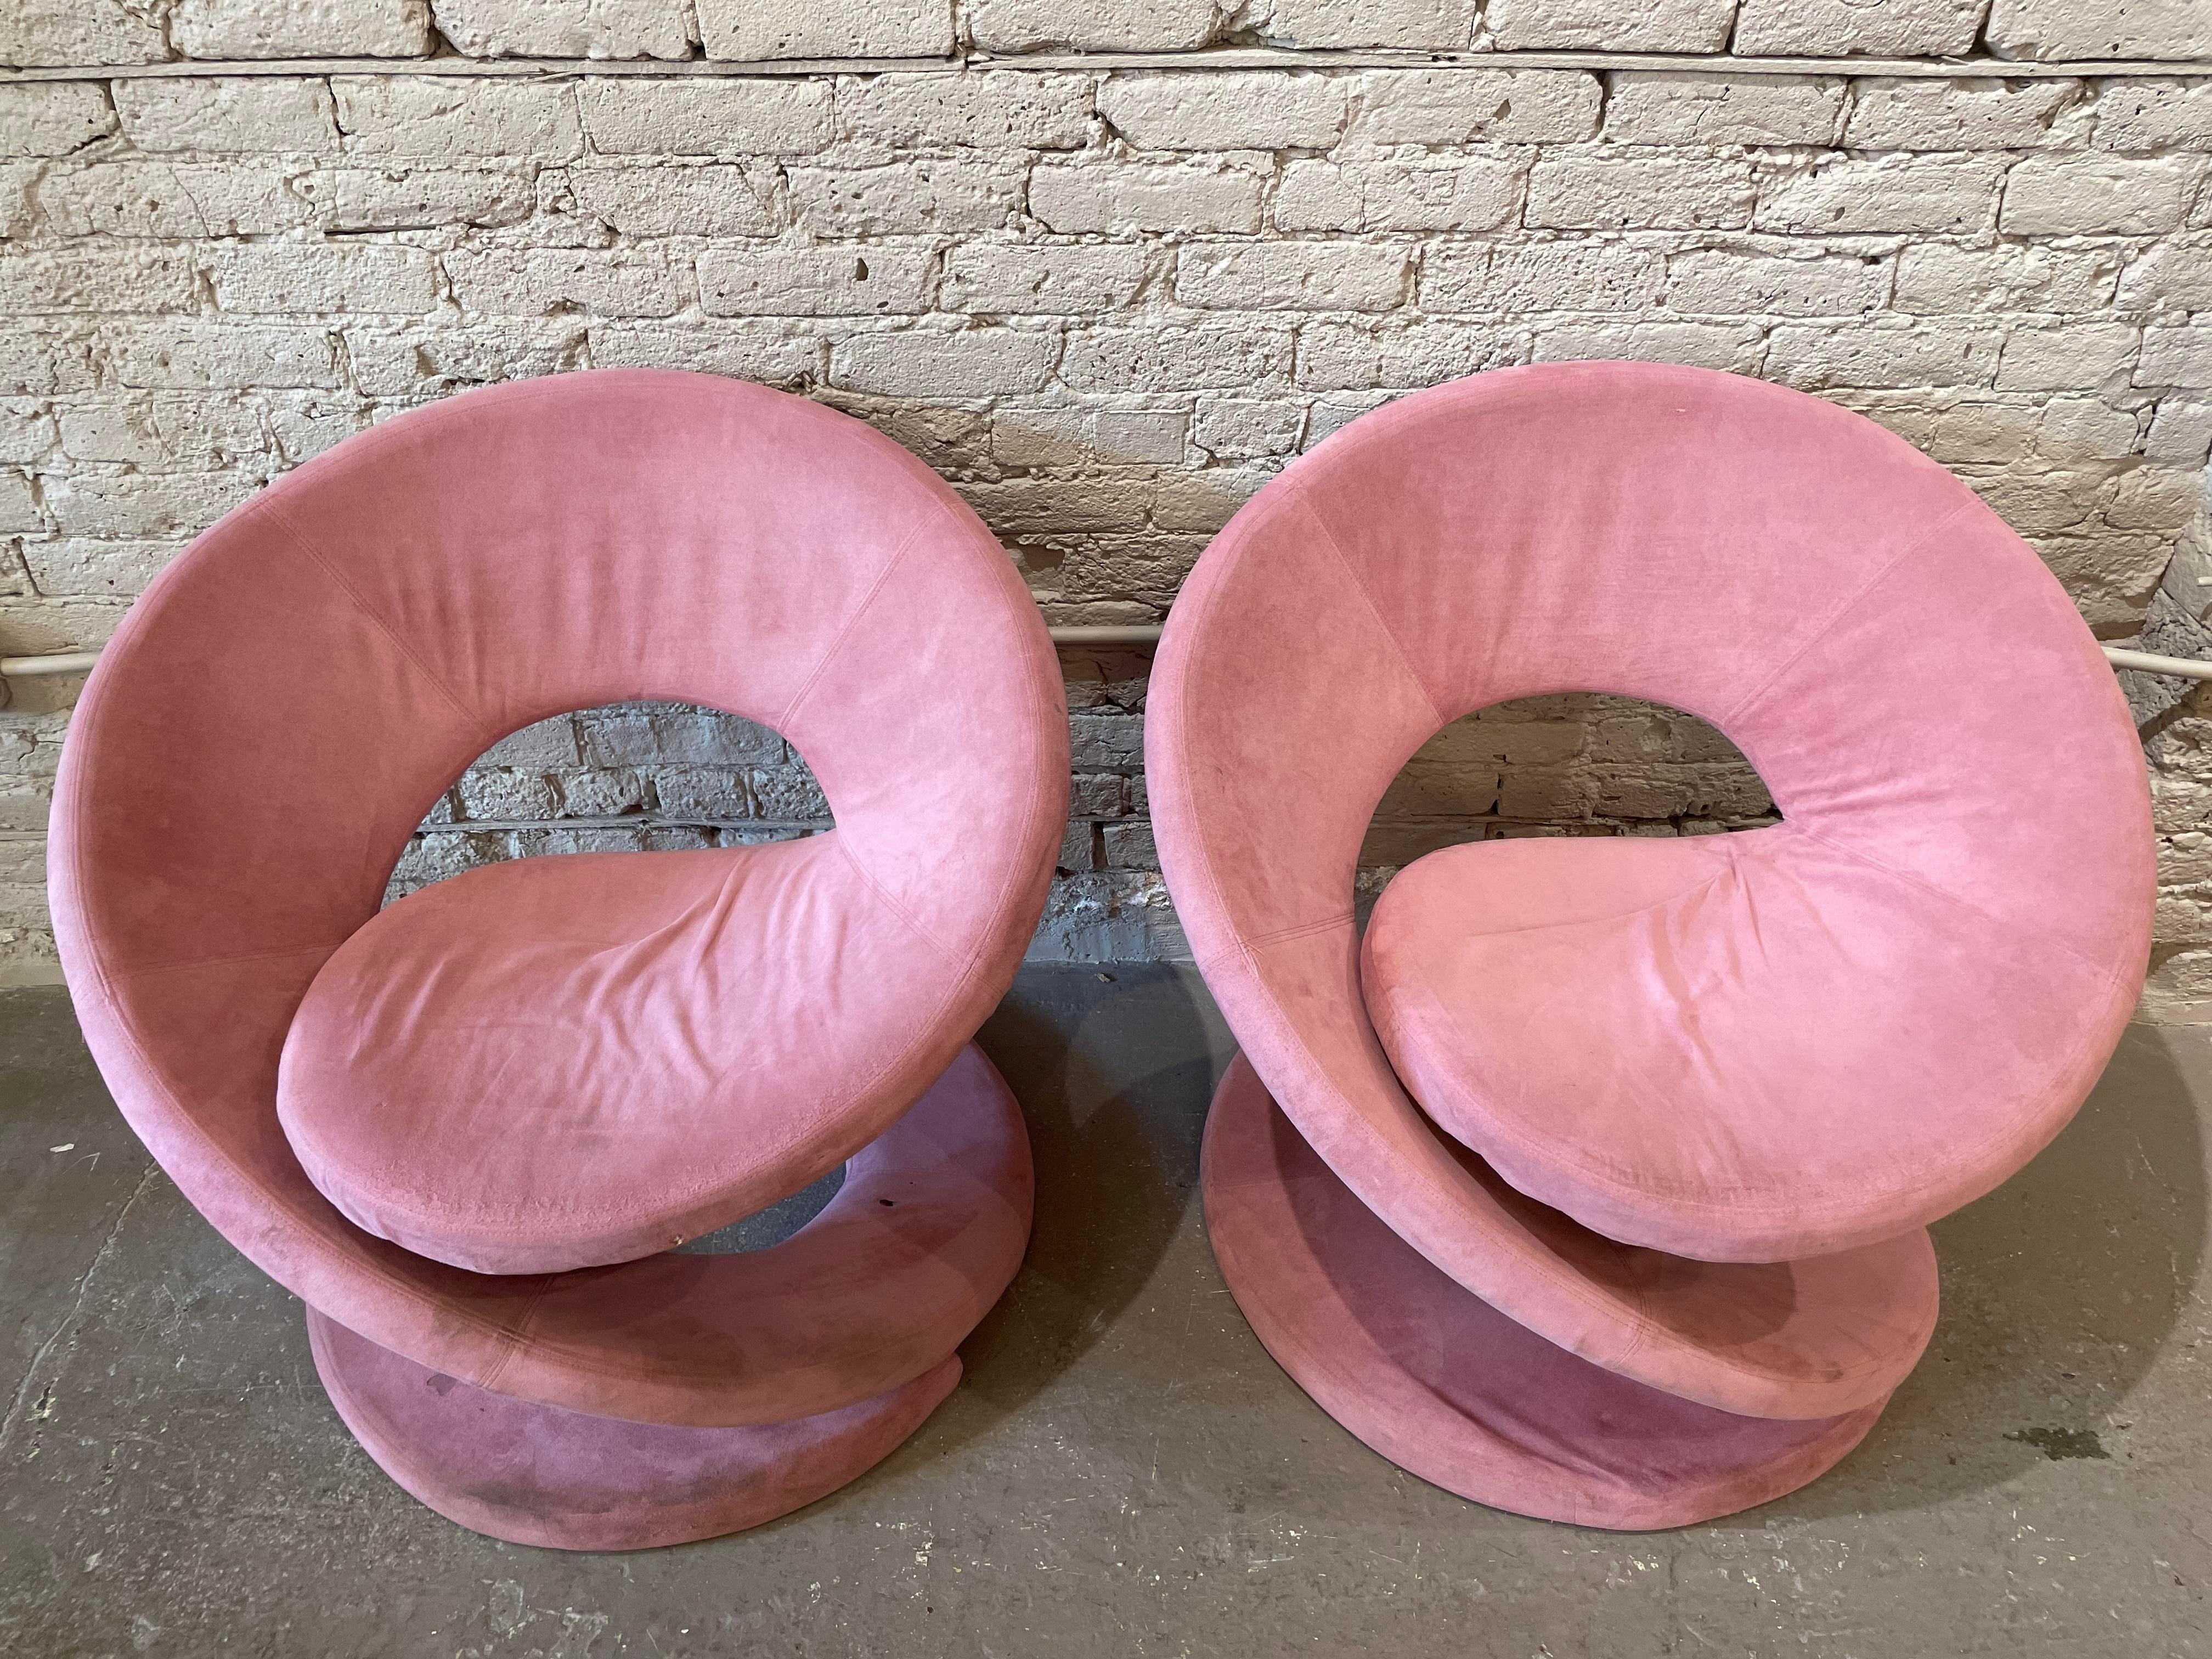 1980s Postmodern Corkscrew Chairs Attributed to Quebec 69 Jaymar - a Pair In Good Condition For Sale In Chicago, IL